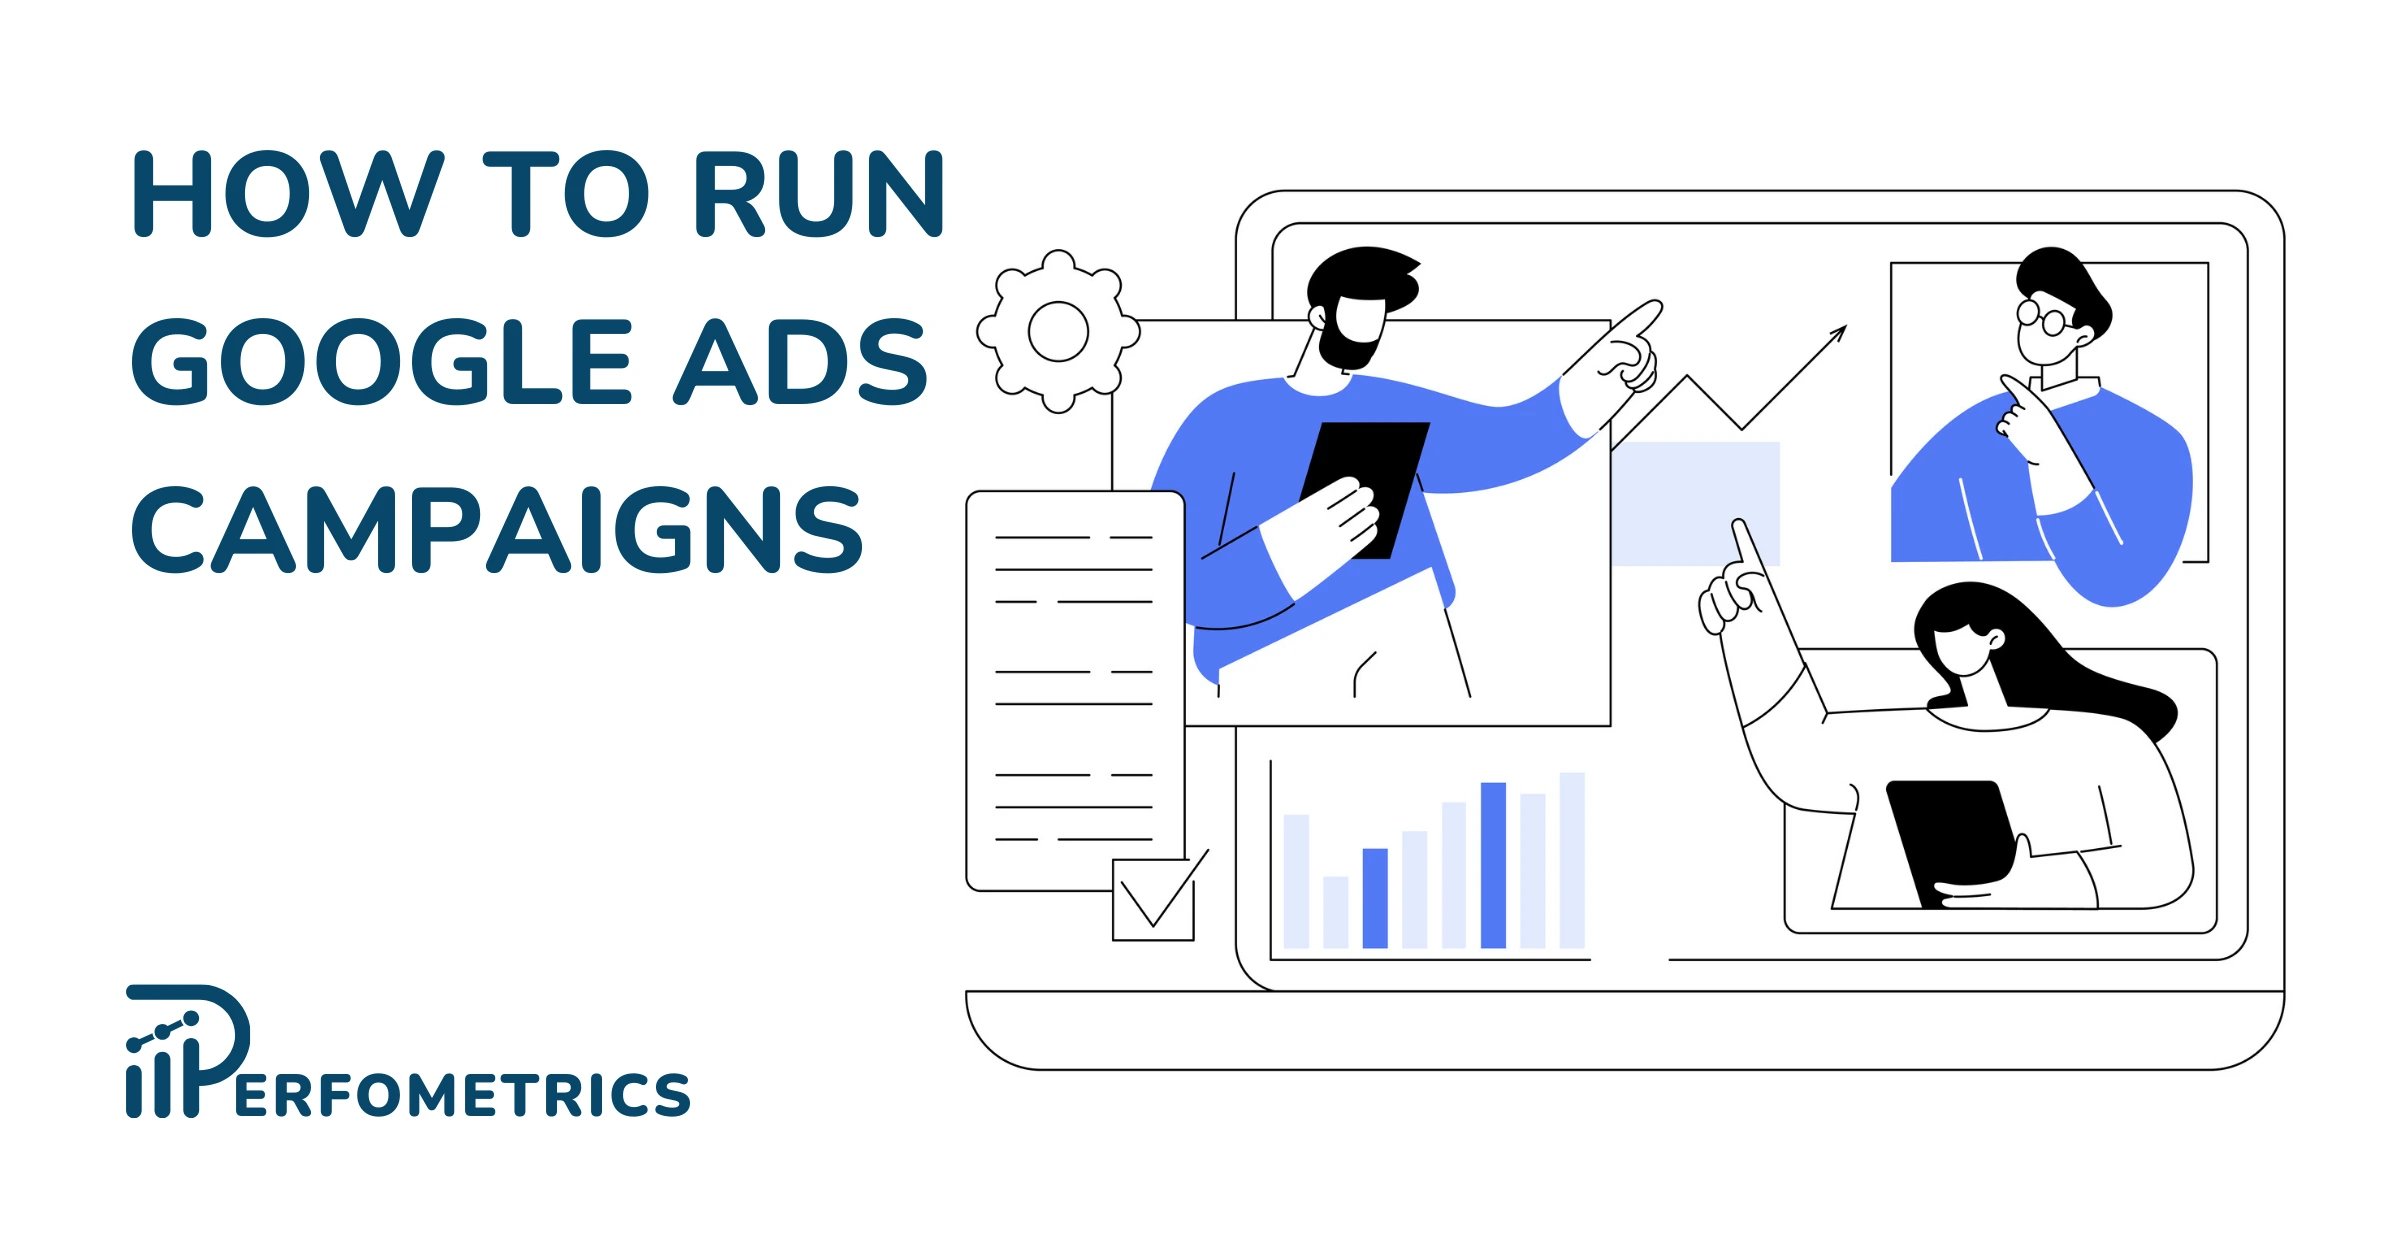 How to Run Google Ads Campaigns